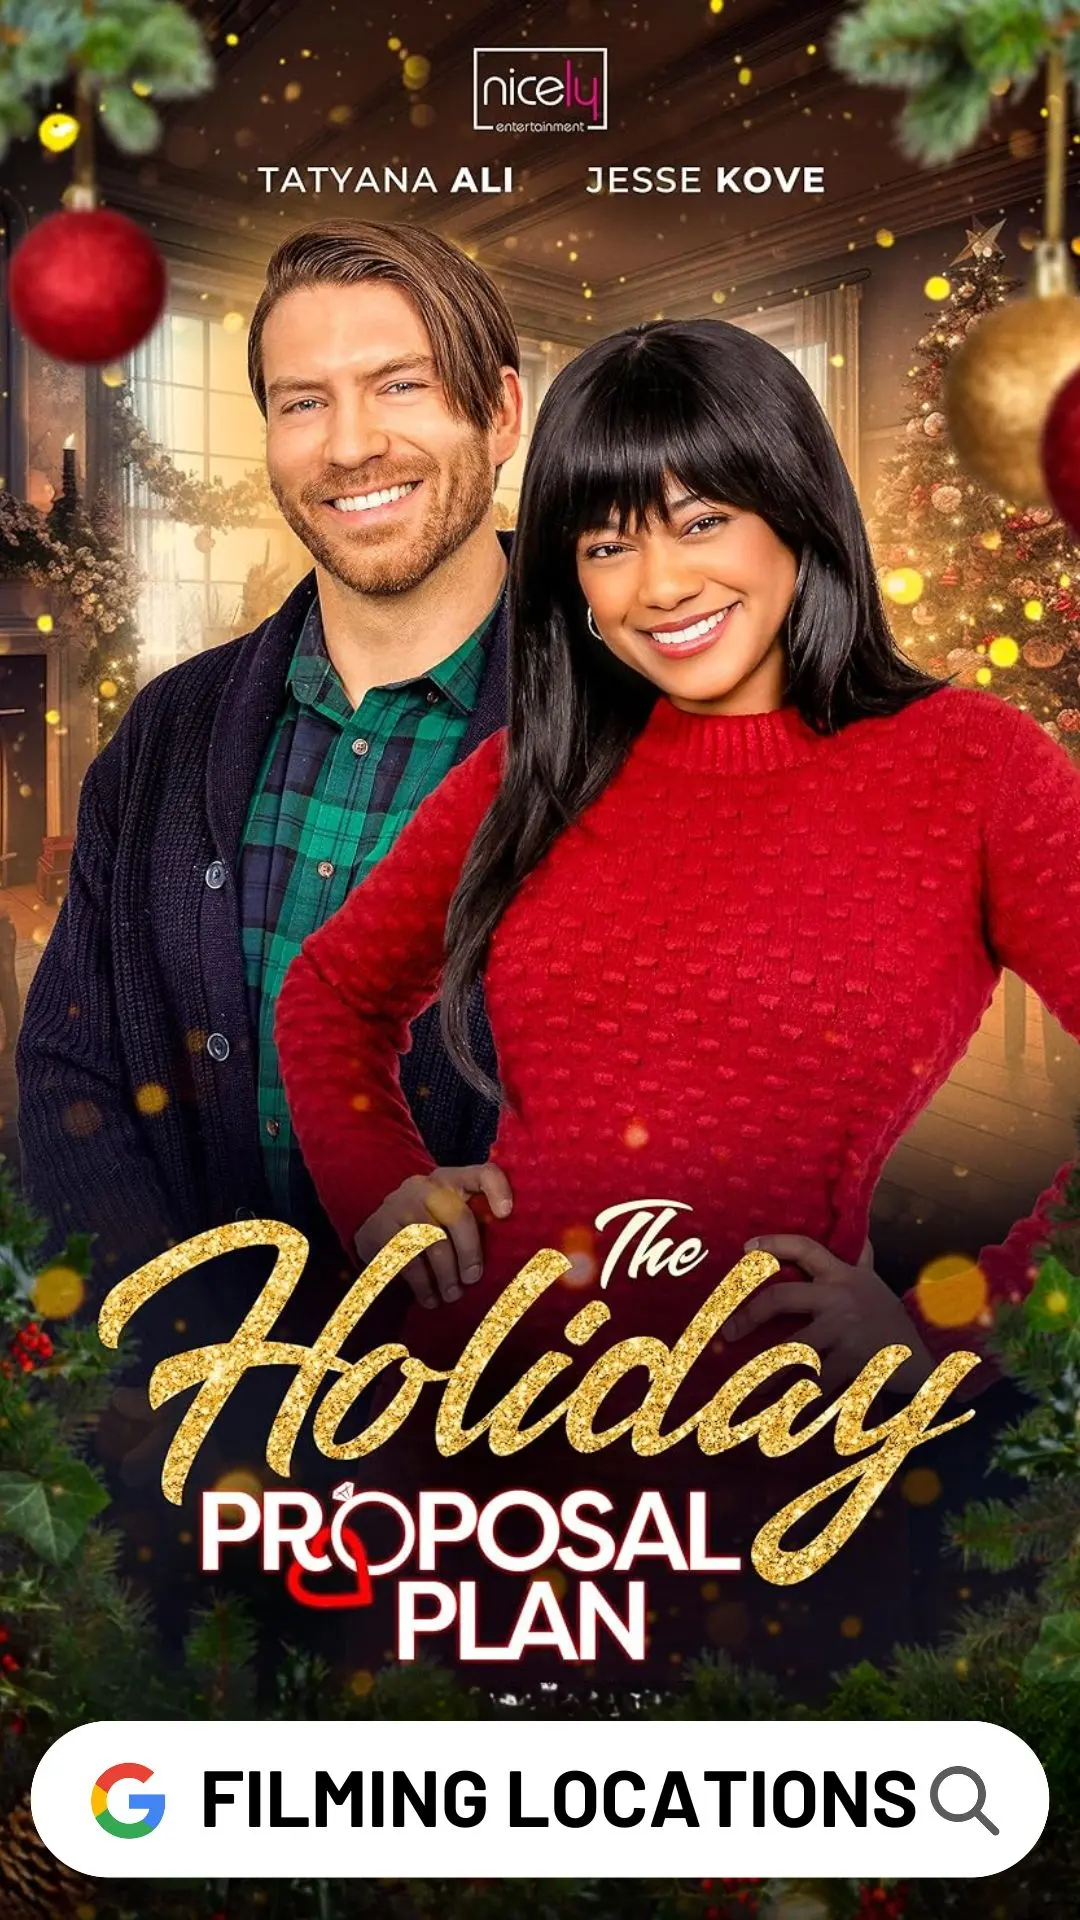 The Holiday Proposal Plan Filming Locations